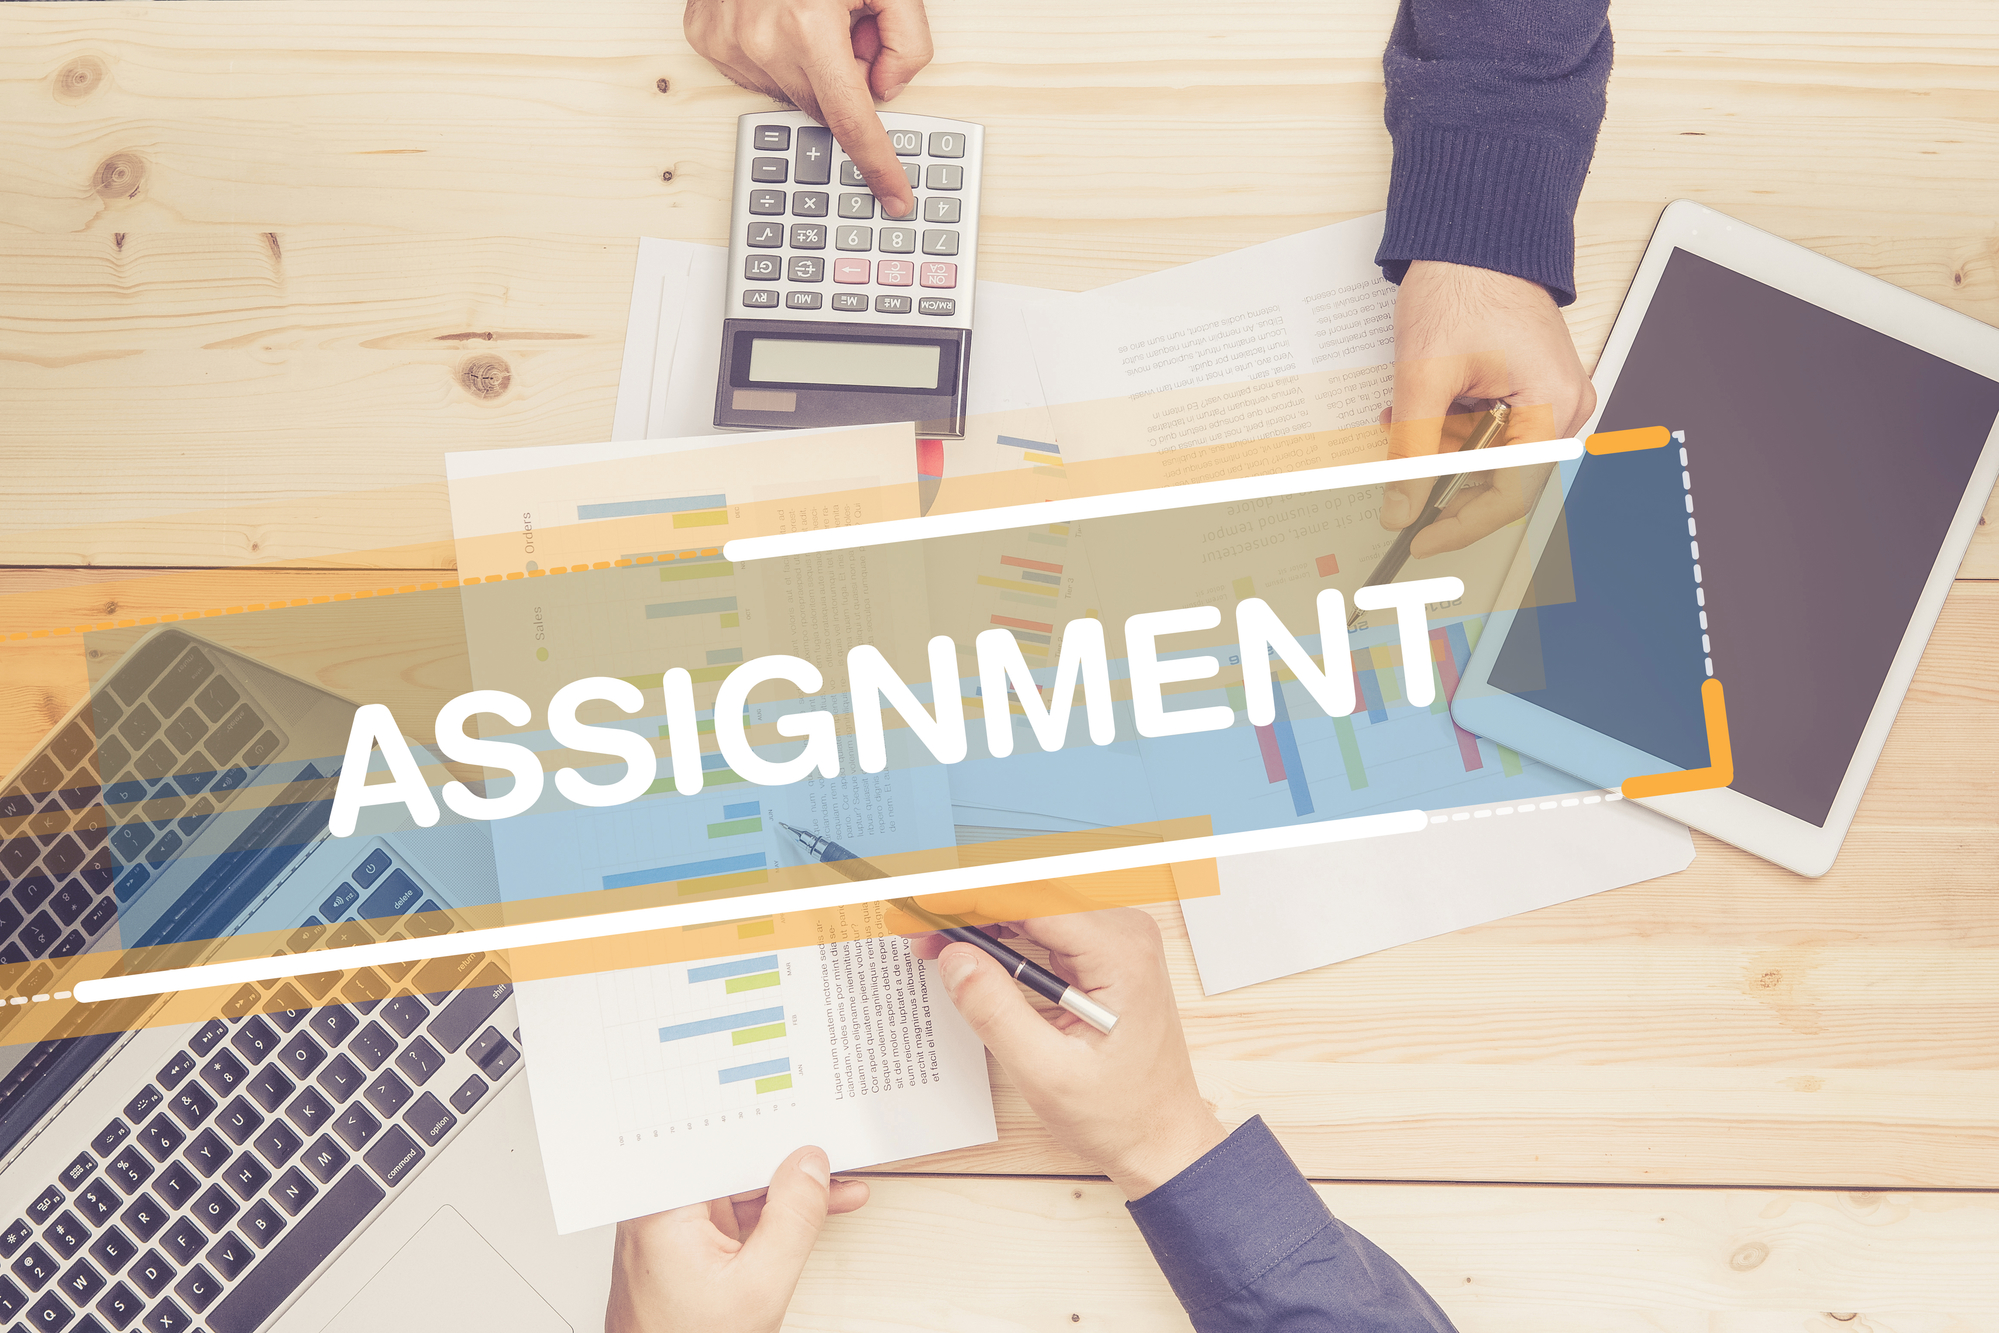 Here Are Some Reasons Why Assignments Are Considered To Be Important